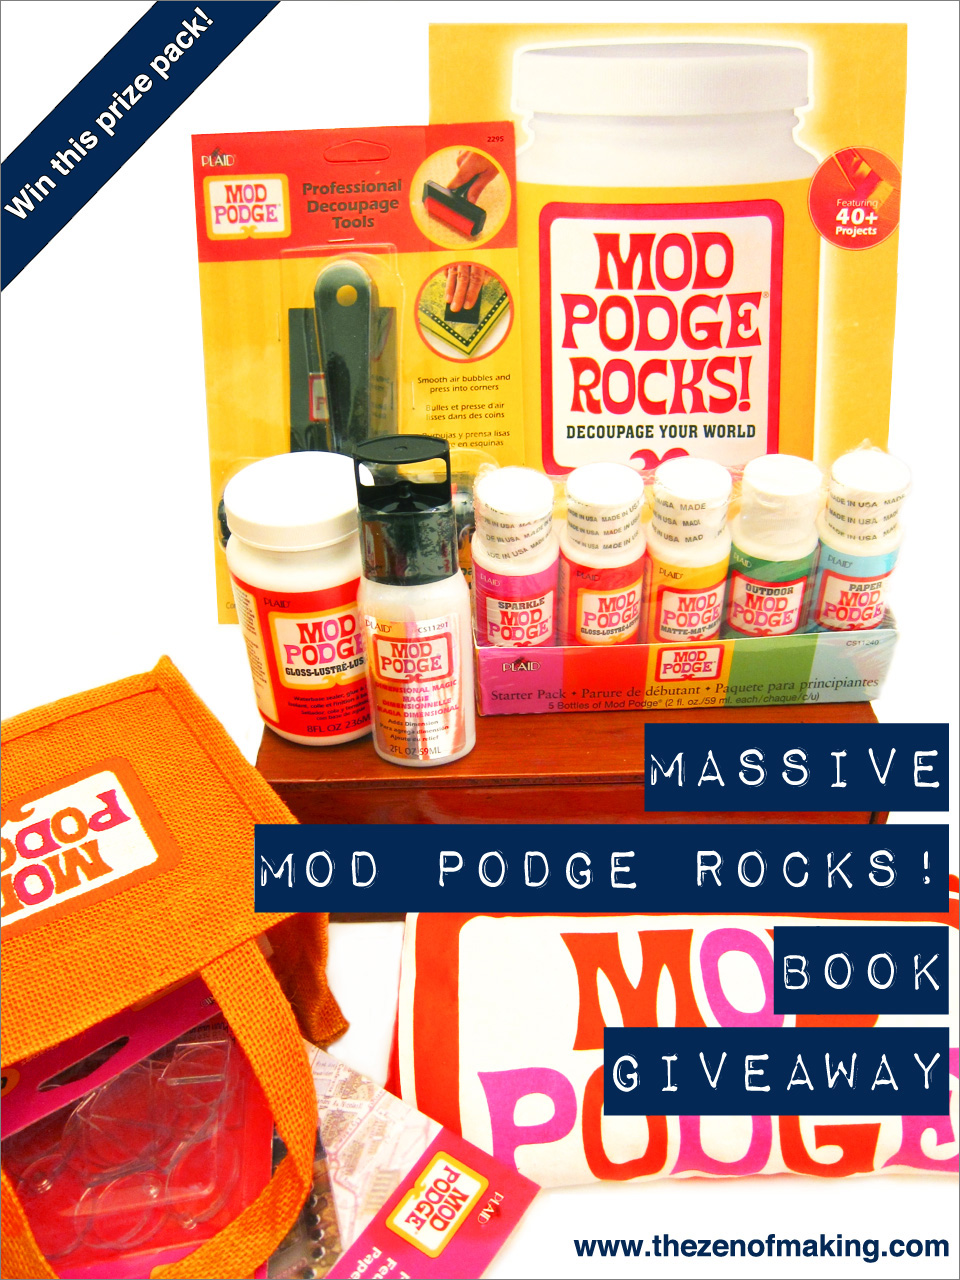 Mod Podge Projects for Beginners - Mod Podge Rocks